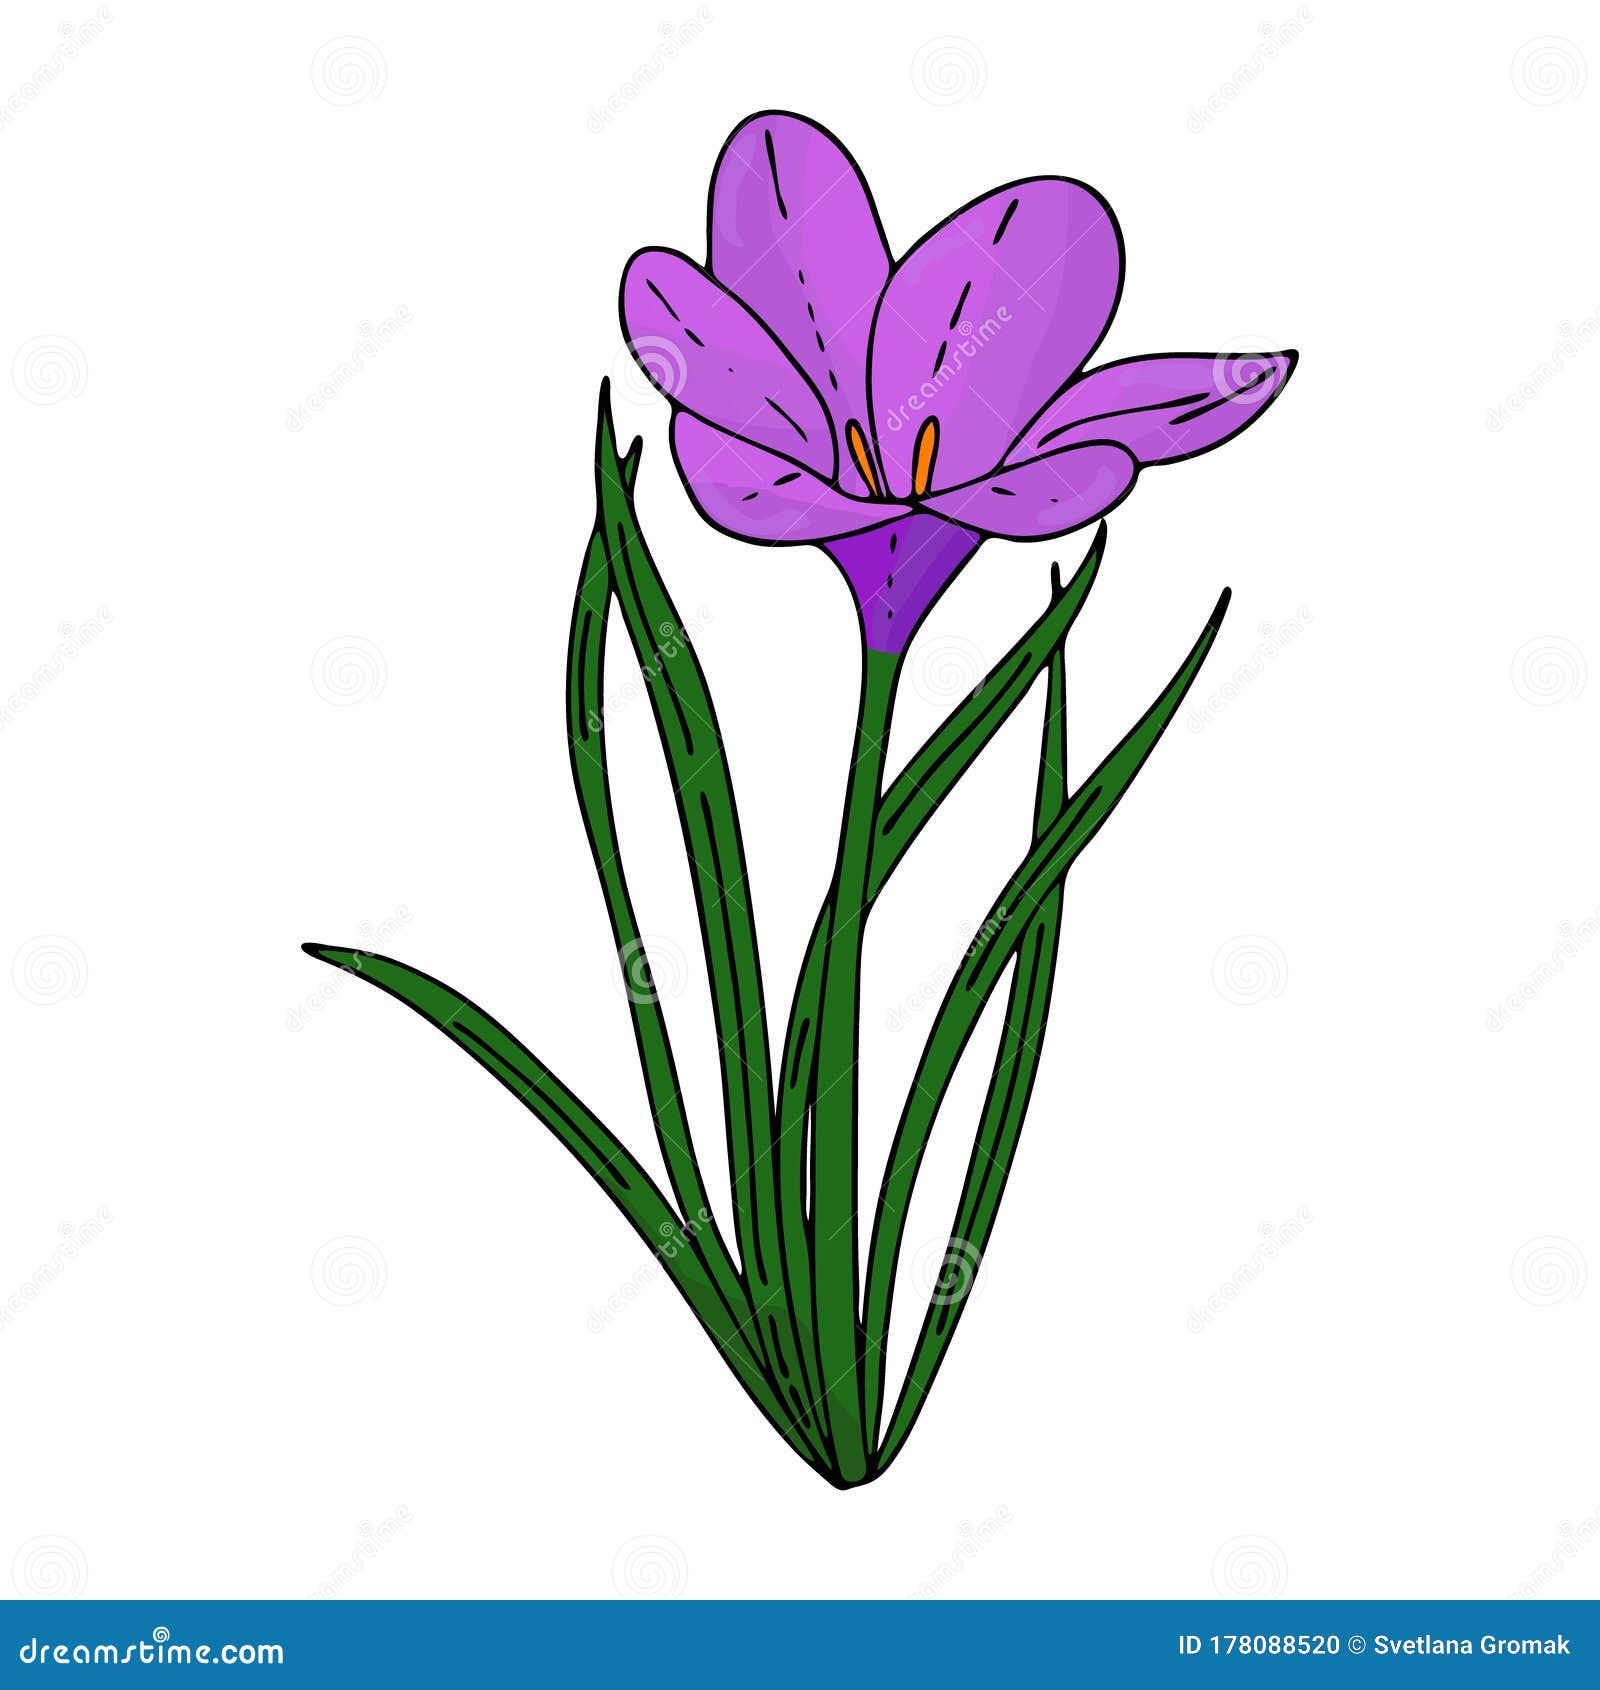 Crocus Outline Drawing The First Spring Flowers In The Doodle Style Purple Flowers Floristics For Decoration Postcards Weddings Stock Vector Illustration Of Botanical Graphic 178088520